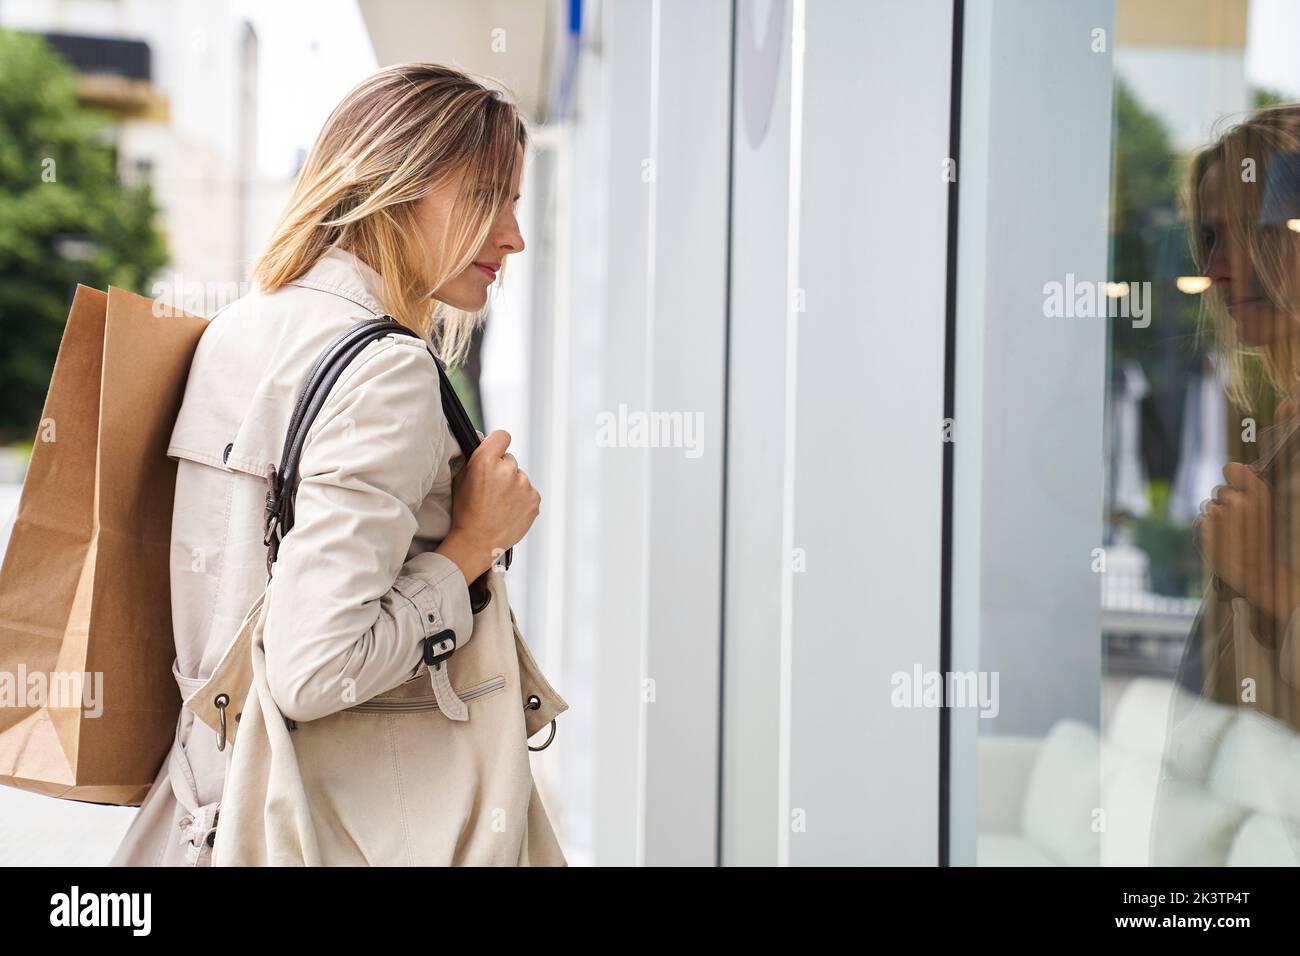 Side view shot of woman carrying bags while window shopping Stock Photo